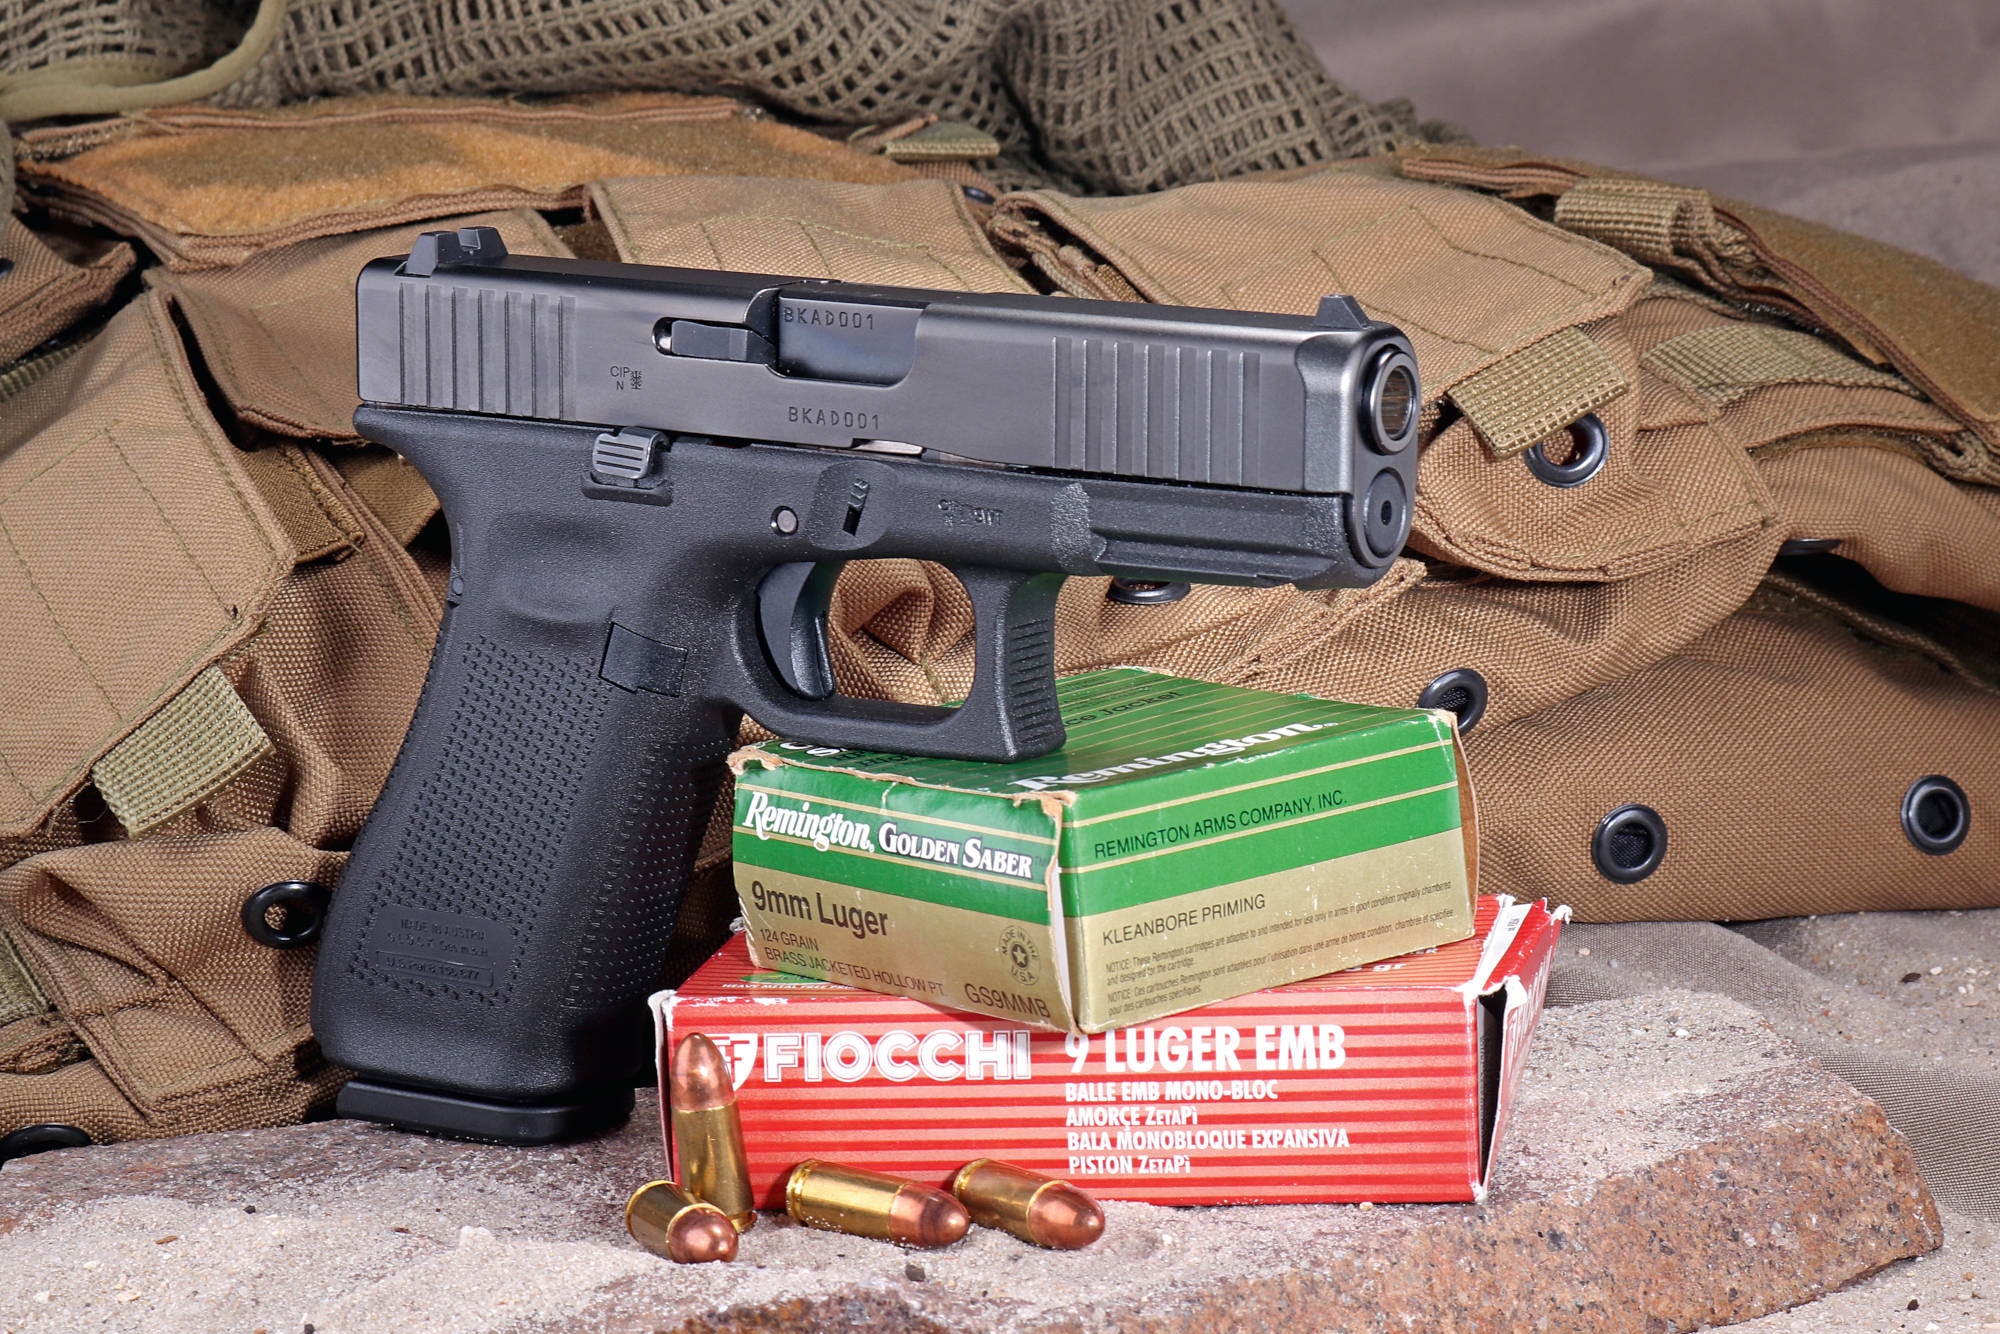 5th Generation 45 ACP: Glock Brings Gen 5 to the G21 